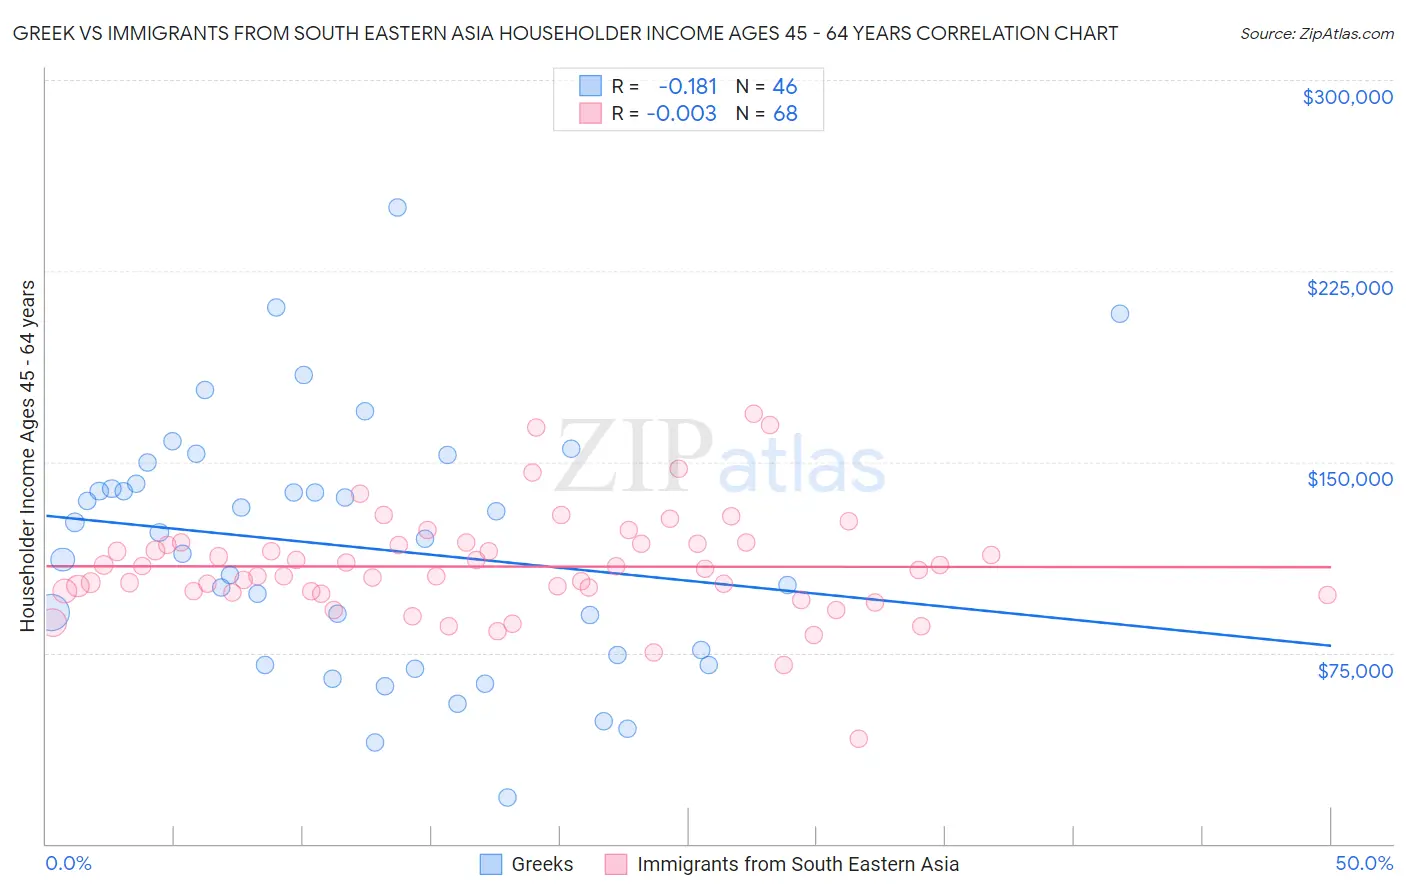 Greek vs Immigrants from South Eastern Asia Householder Income Ages 45 - 64 years